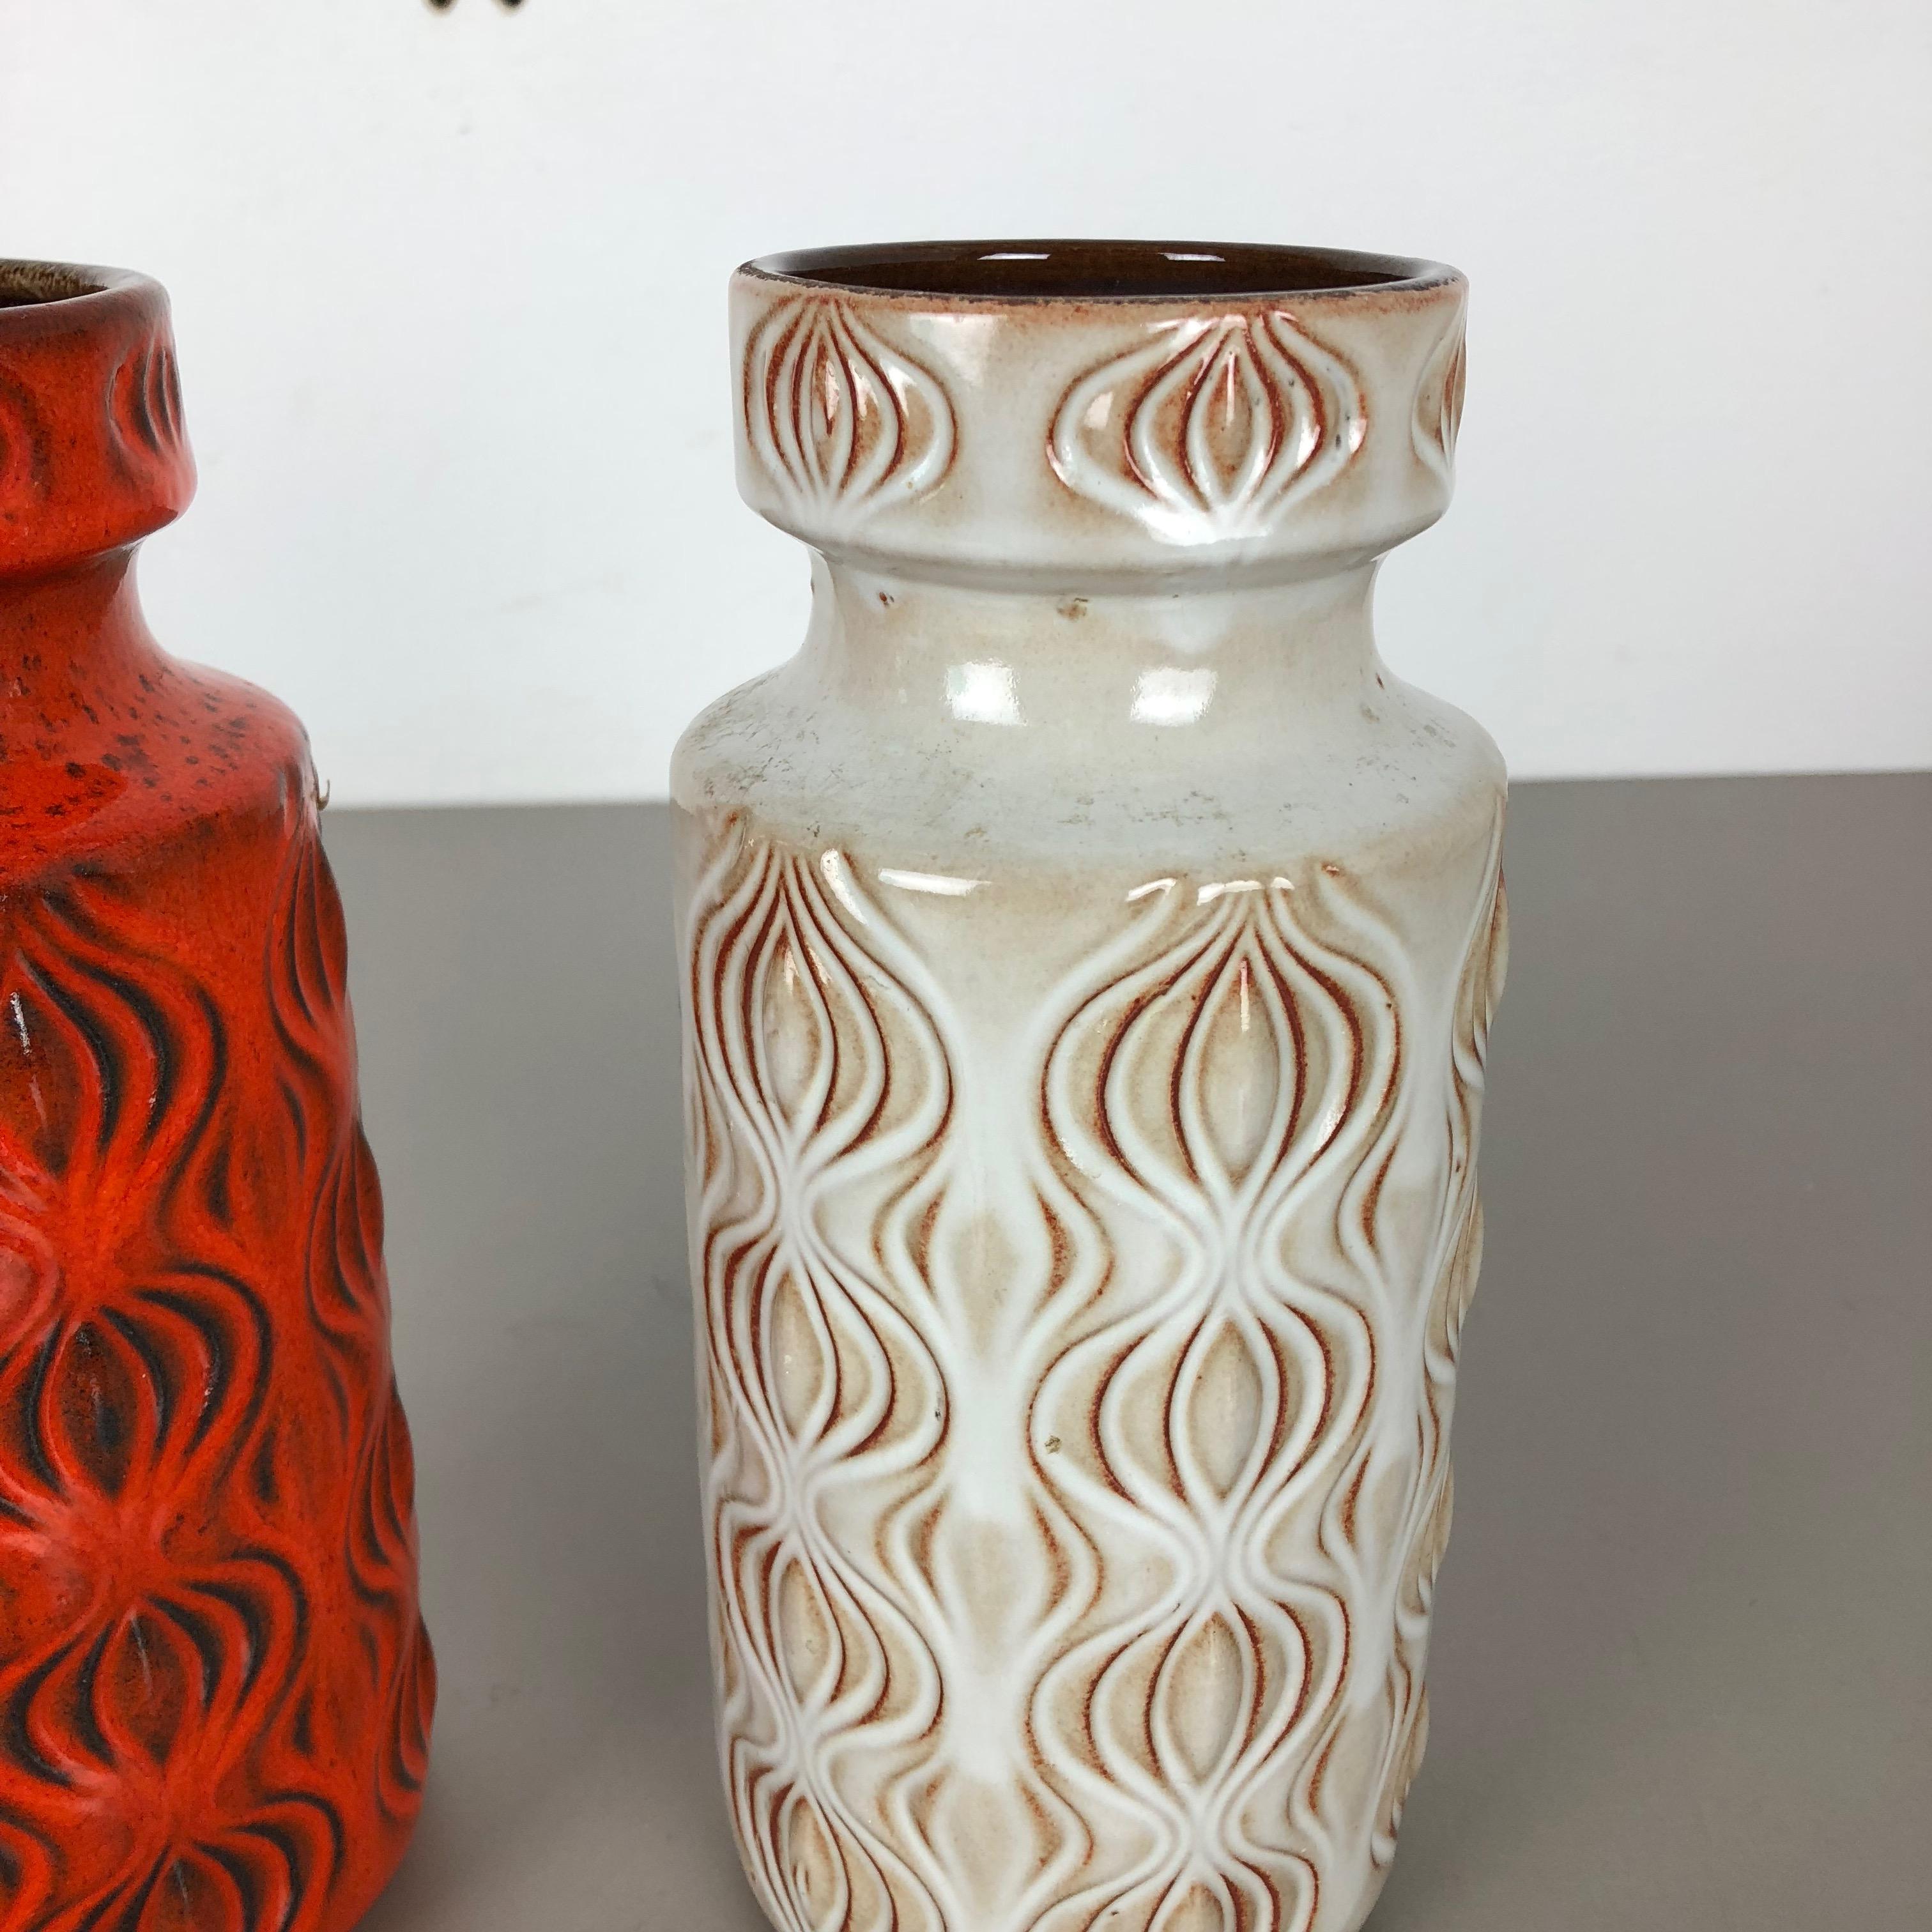 Set of Two Vintage Pottery Fat Lava 'Onion' Vases Made by Scheurich, Germany (Keramik)